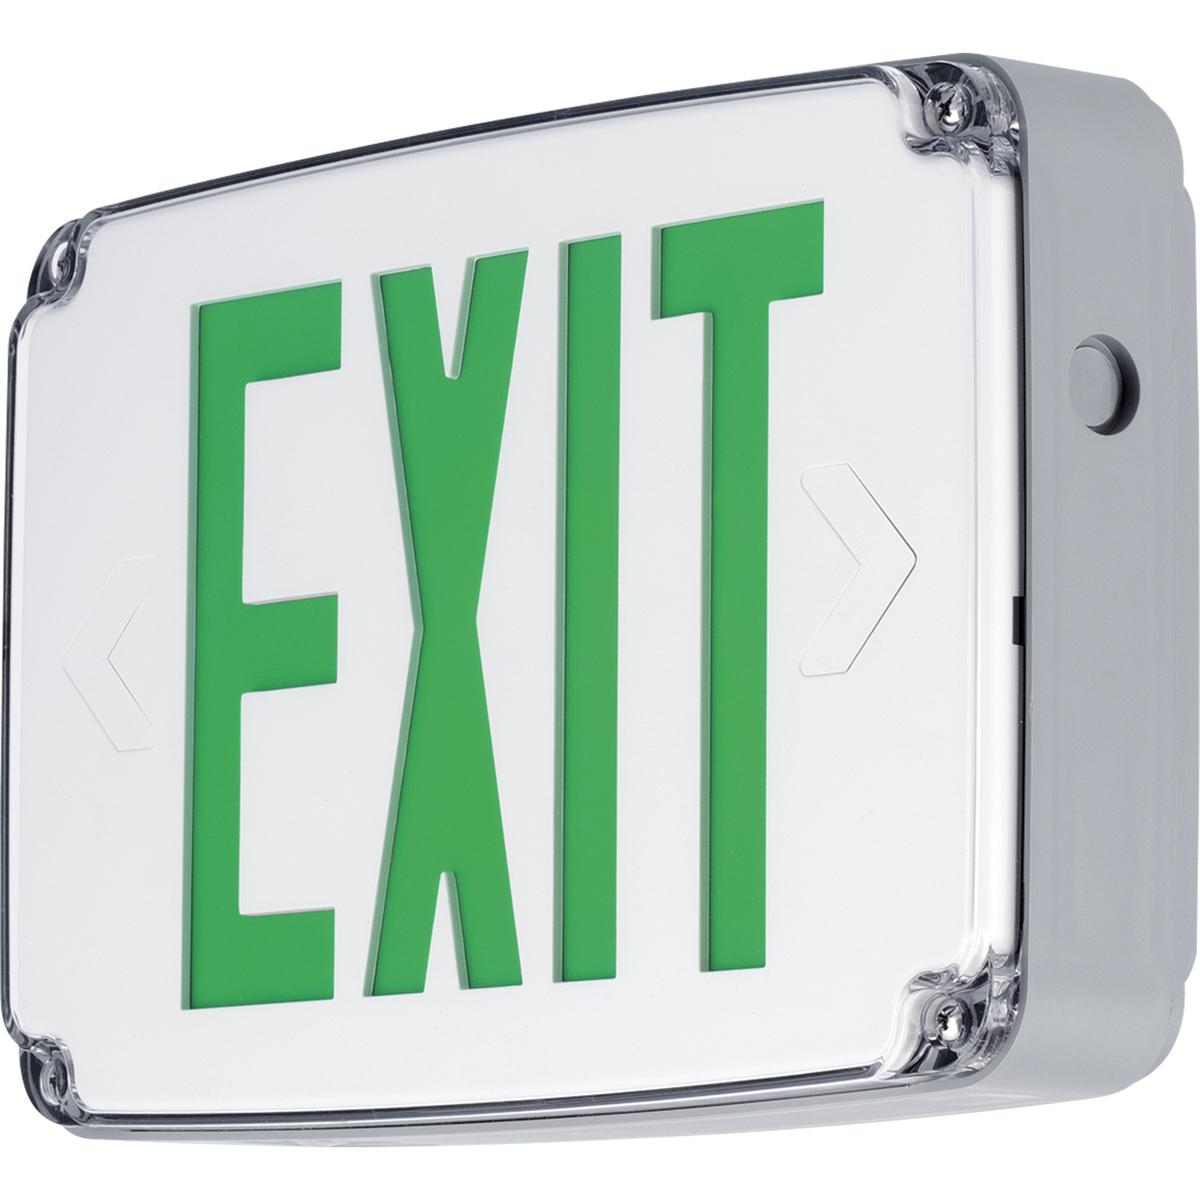 Hubbell PEWLE-SG-30 The PEWLE Series offers quality and value with a wet location rated emergency Exit sign. Housing and face-plate made from impact resistant UV stabilized polycarbonate. Housing is corrosion resistant and face-plate is fully gasketed. Exit face illumination